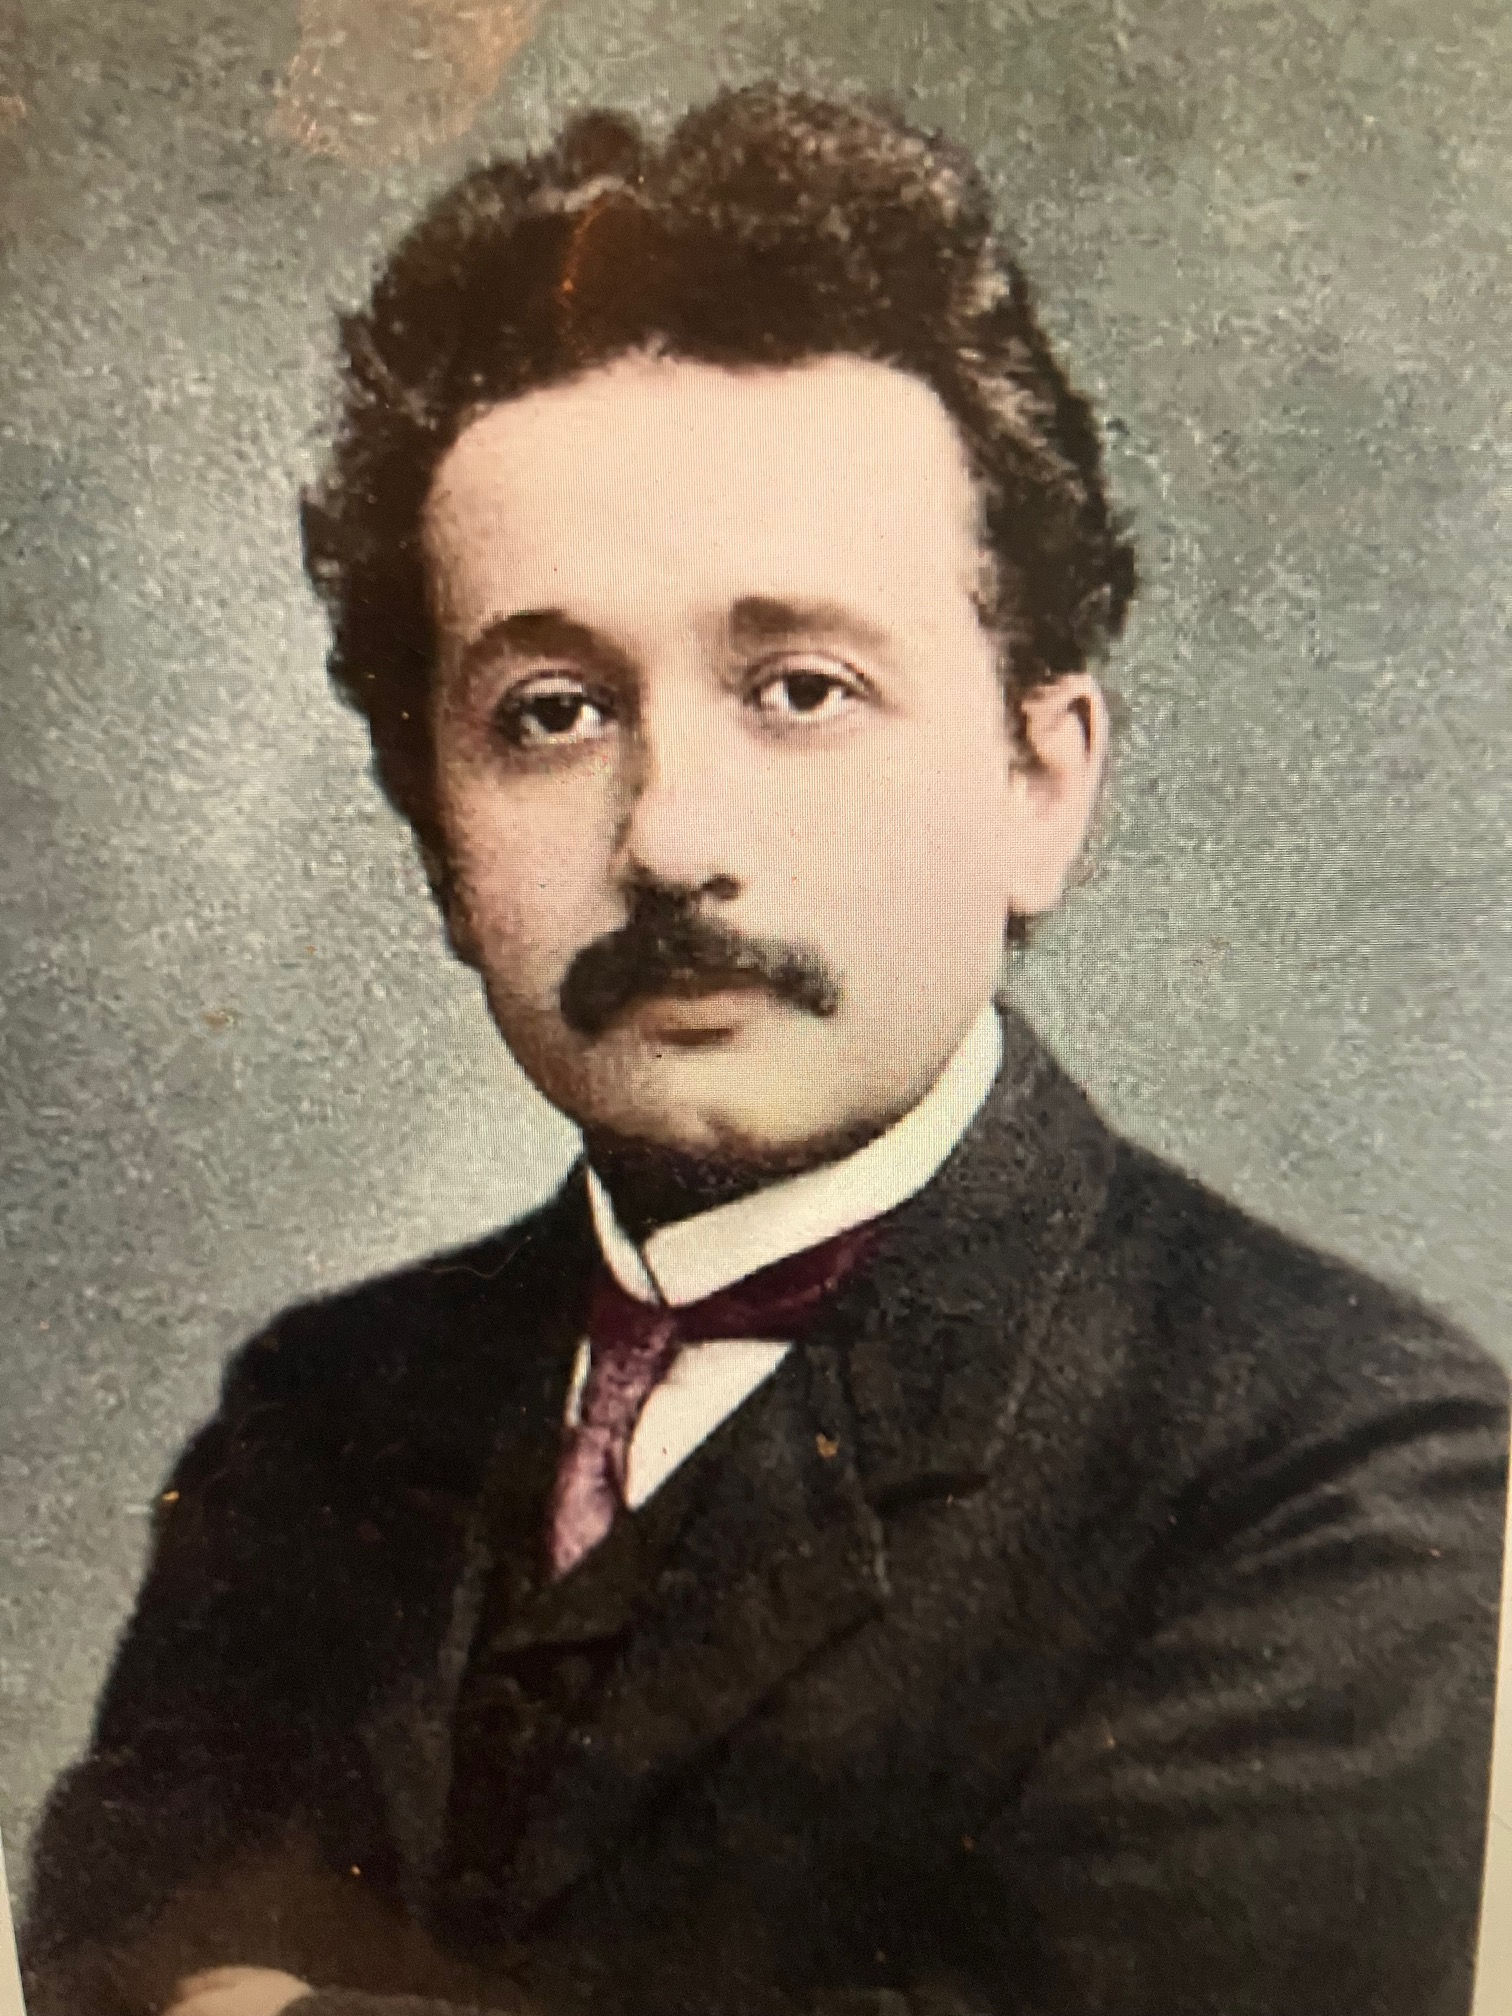 A young and Handsome Albert Einstein